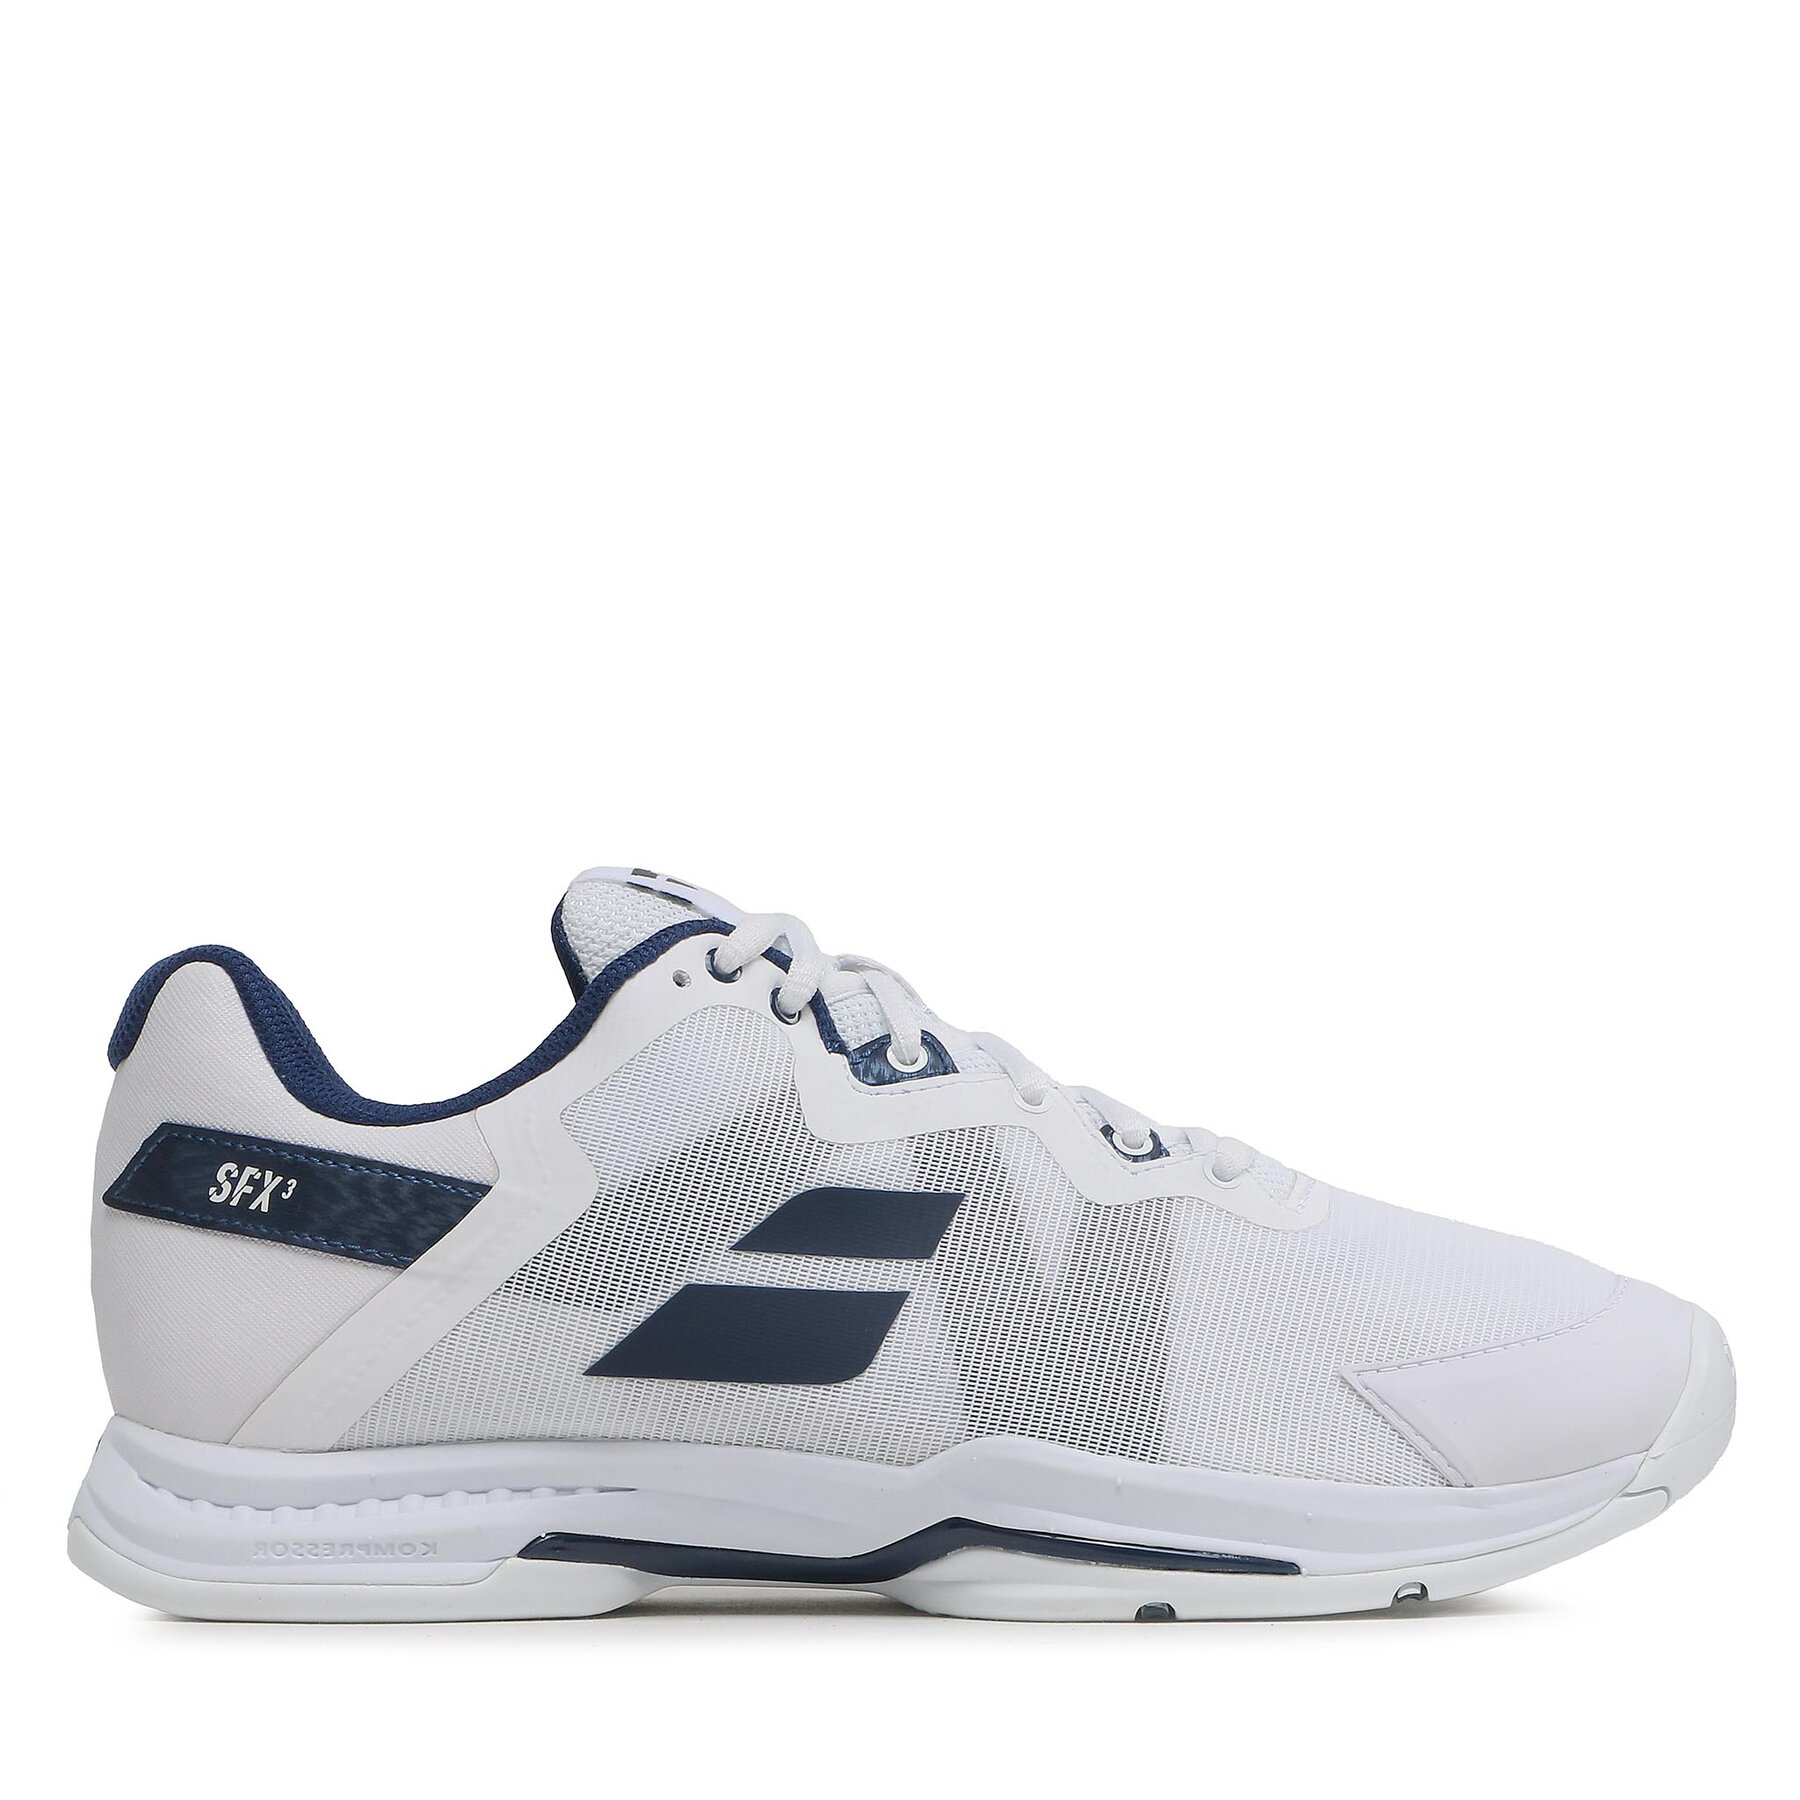 Chaussures Babolat Sfx3 All Court 30S23529 White/Navy